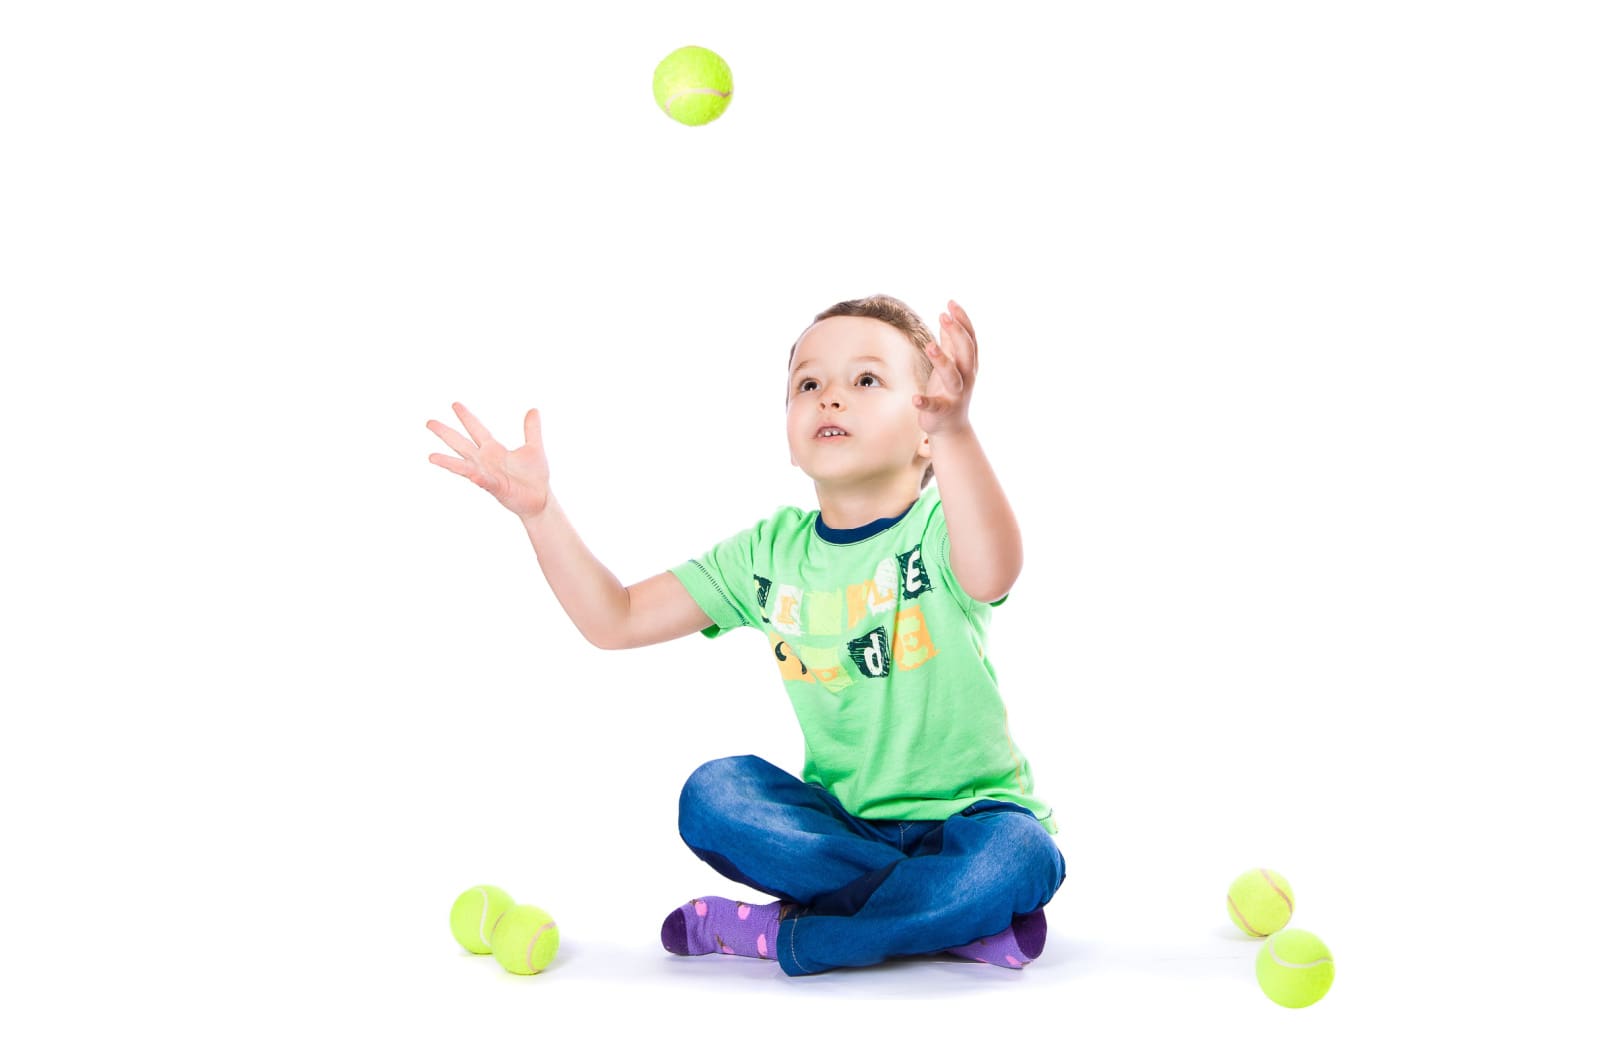 A young boy bouncing a tennis ball against the wall. Bouncing a ball against a wall can help strengthen visual skills in children